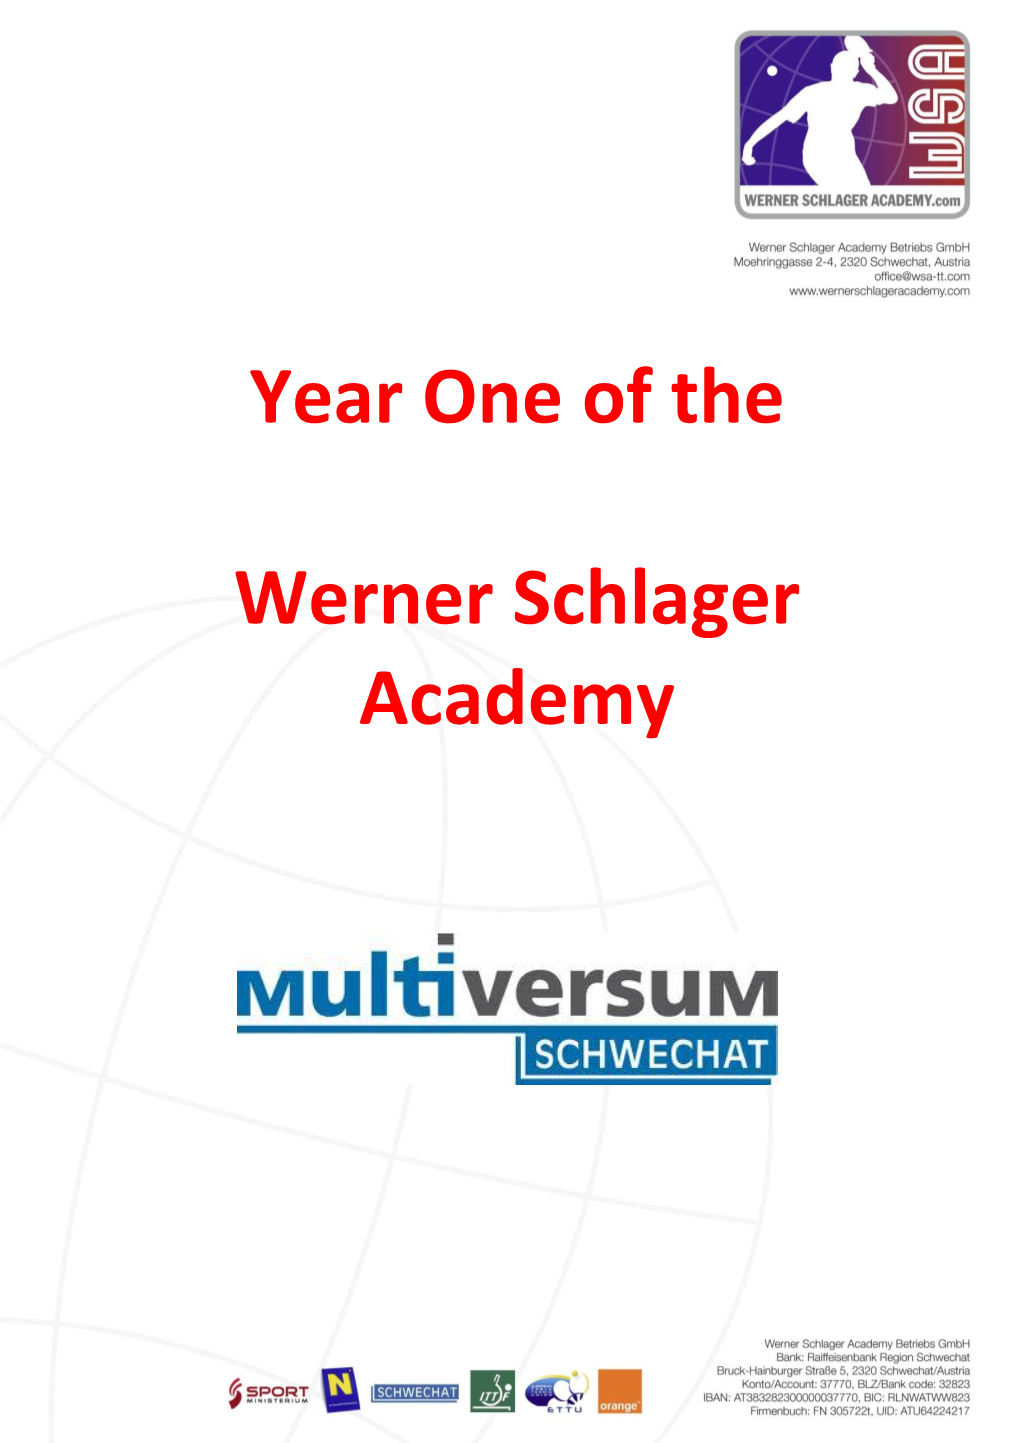 Year One of the Werner Schlager Academy